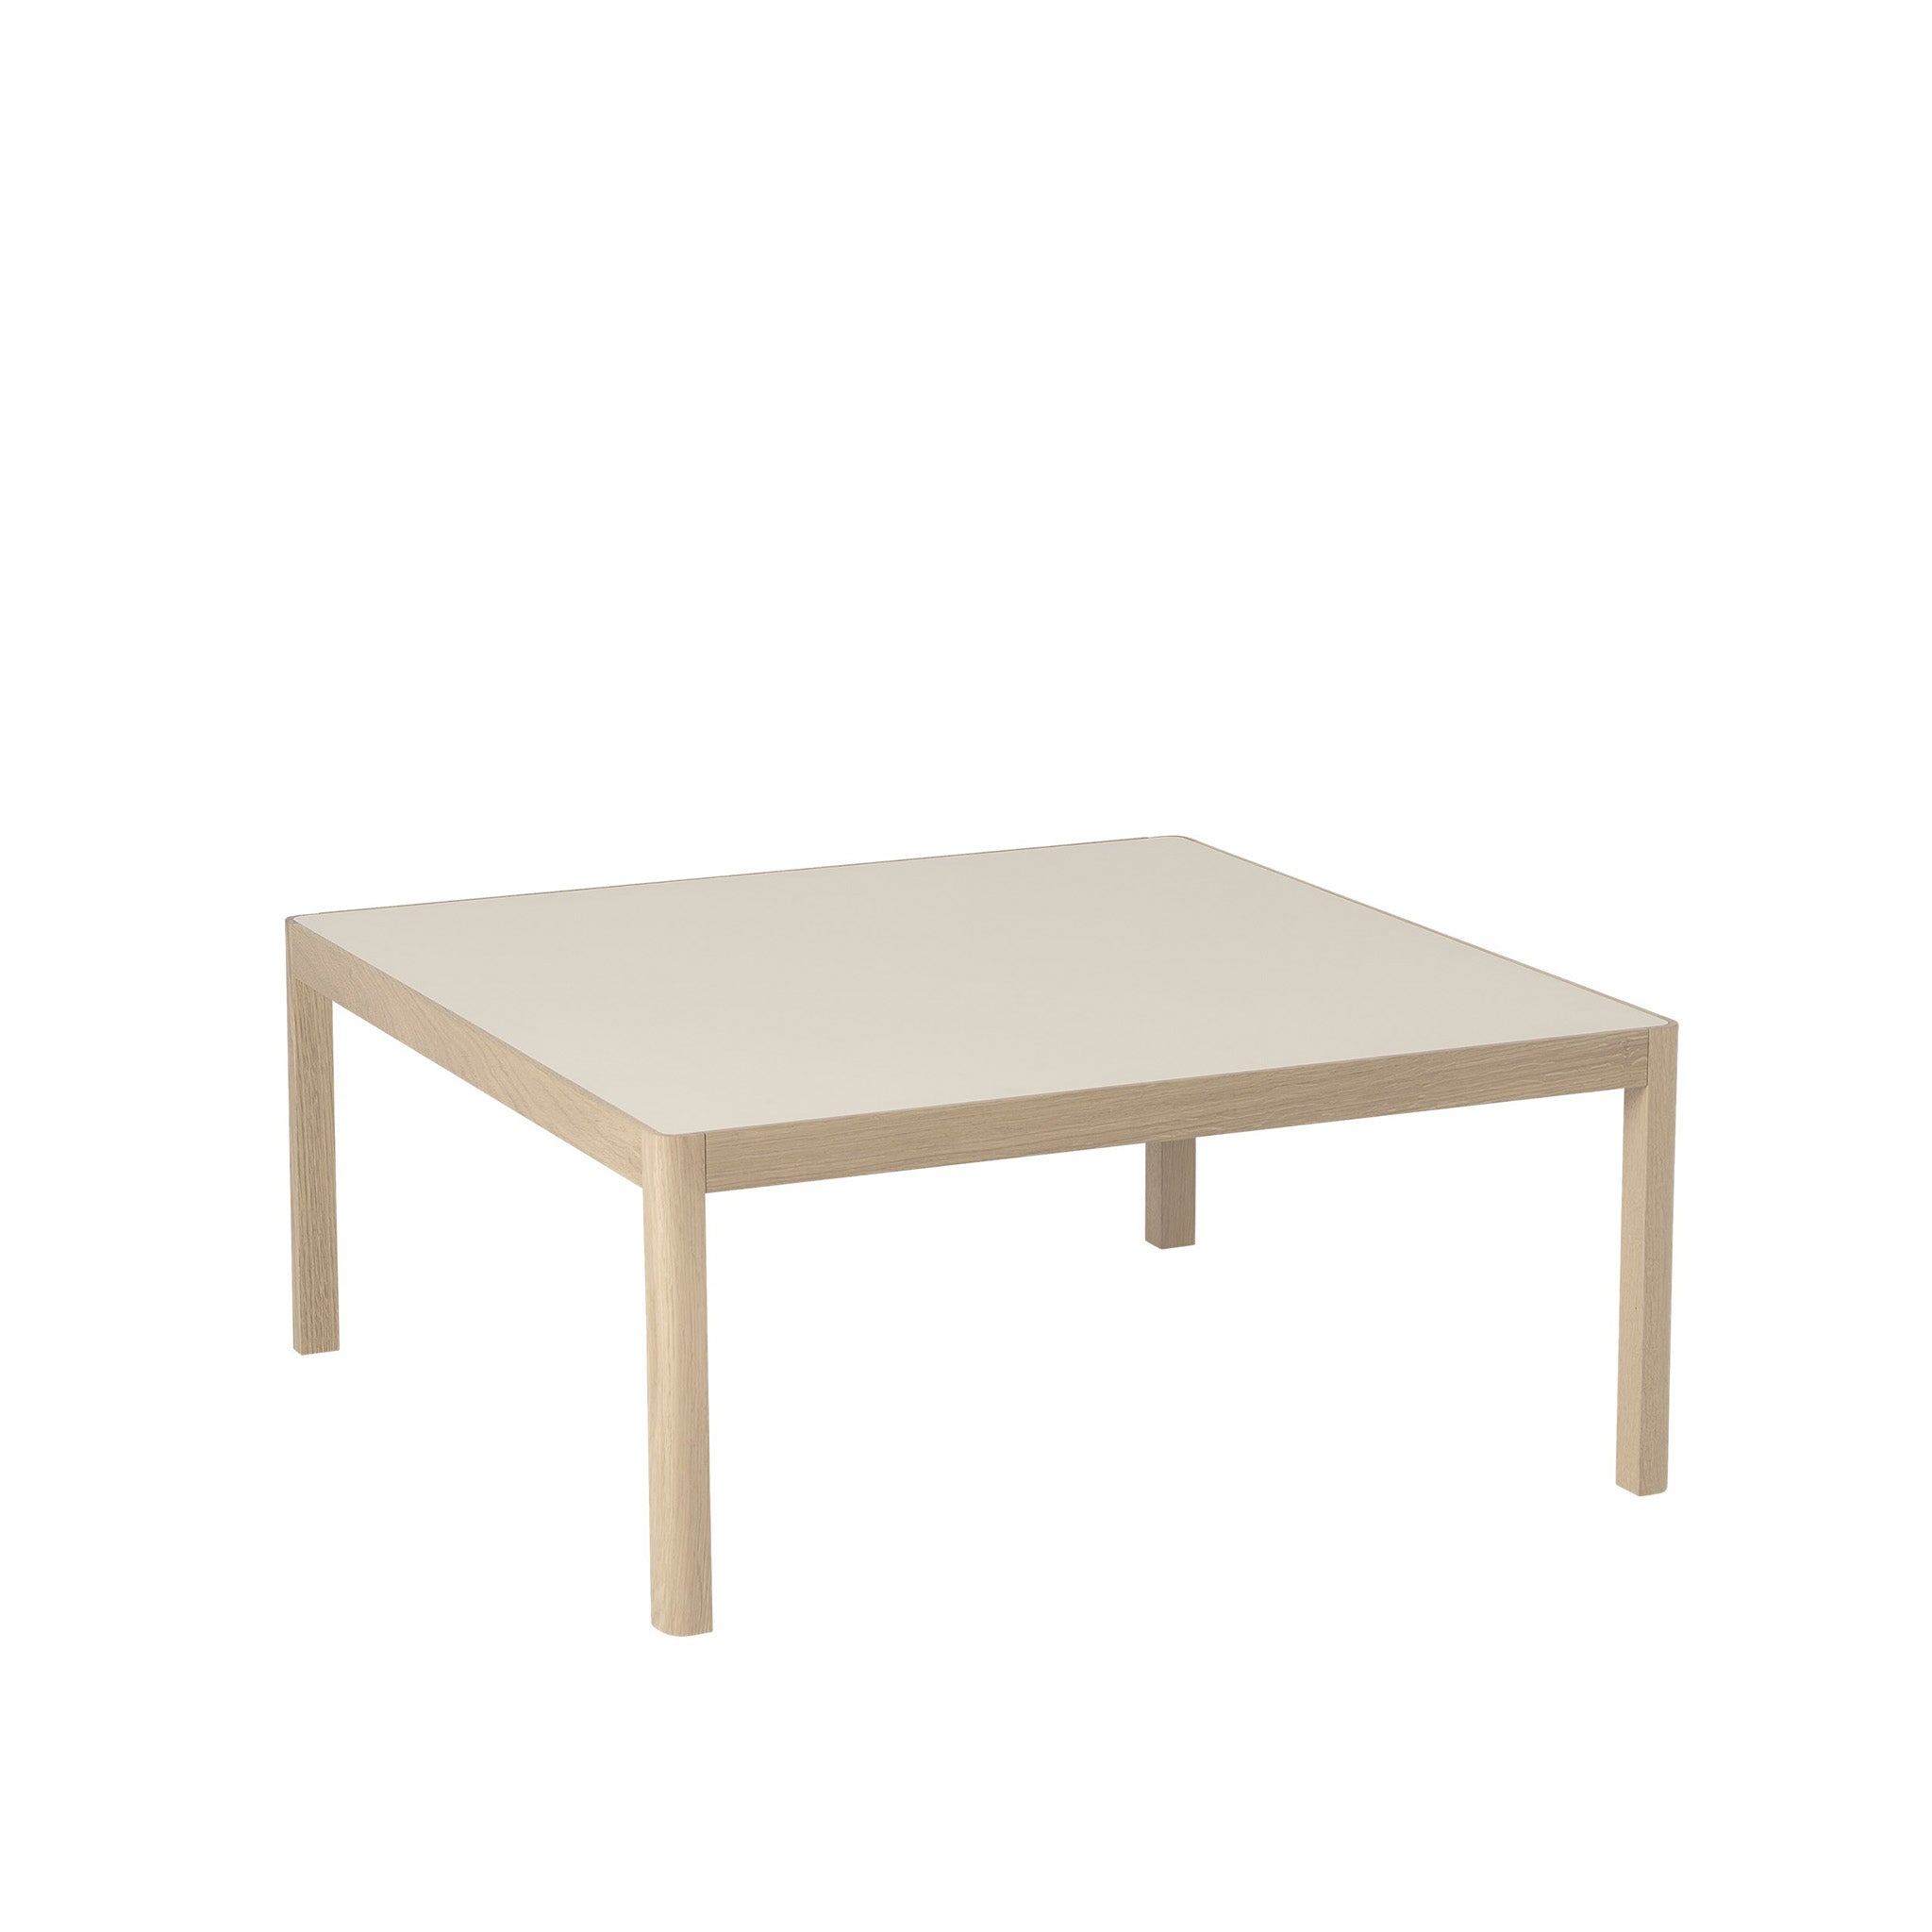 Workshop Coffee Table - Square by Muuto